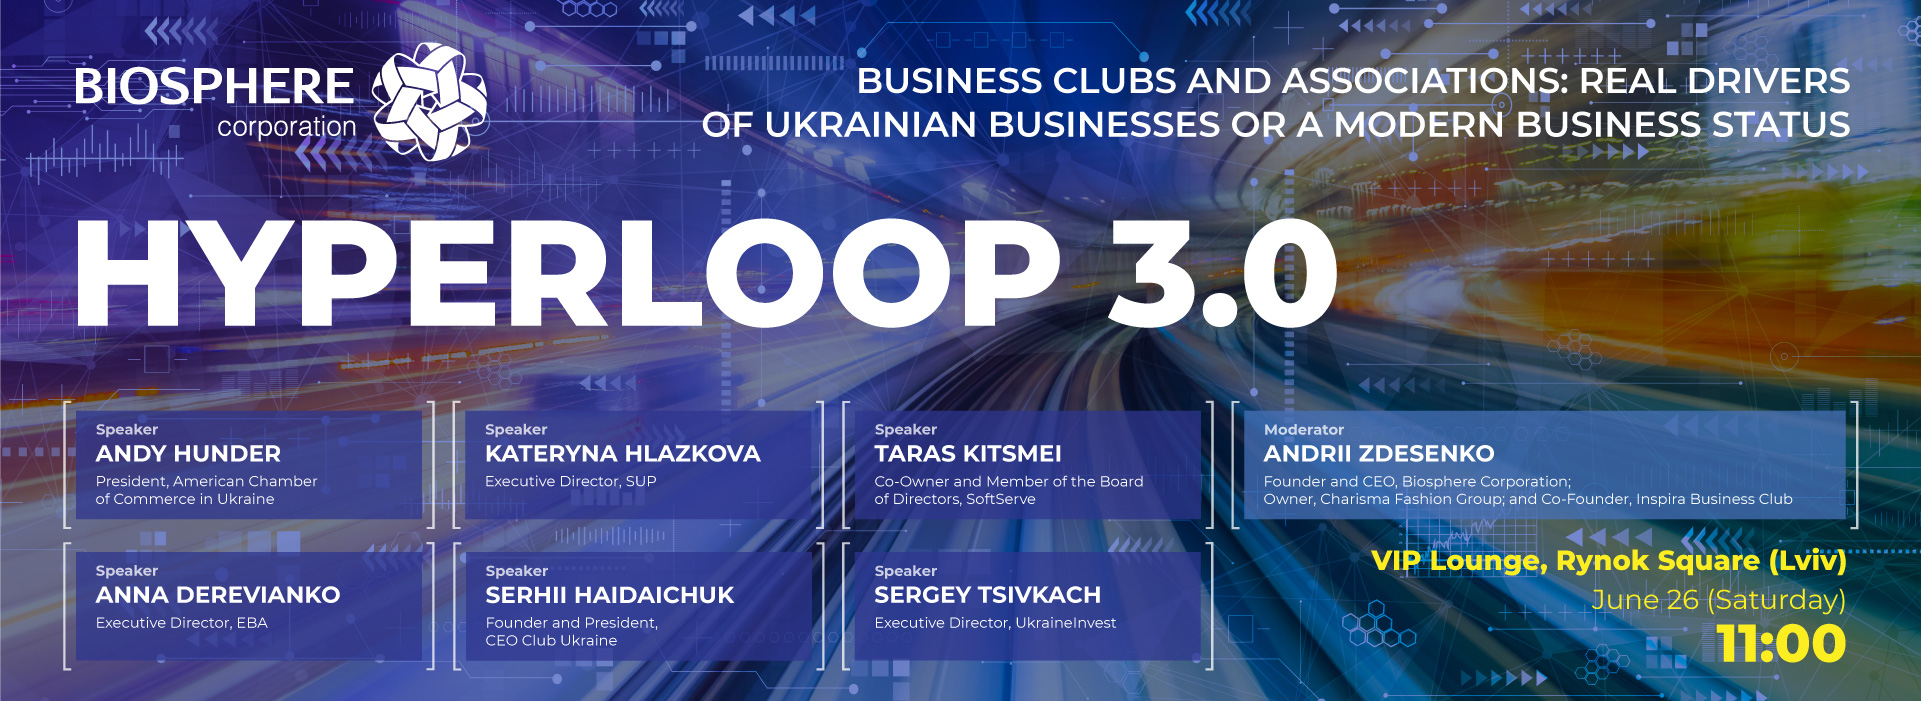 Hyperloop 3.0. Business Clubs and Associations: Real Drivers of Ukrainian Businesses or a Modern Business Status